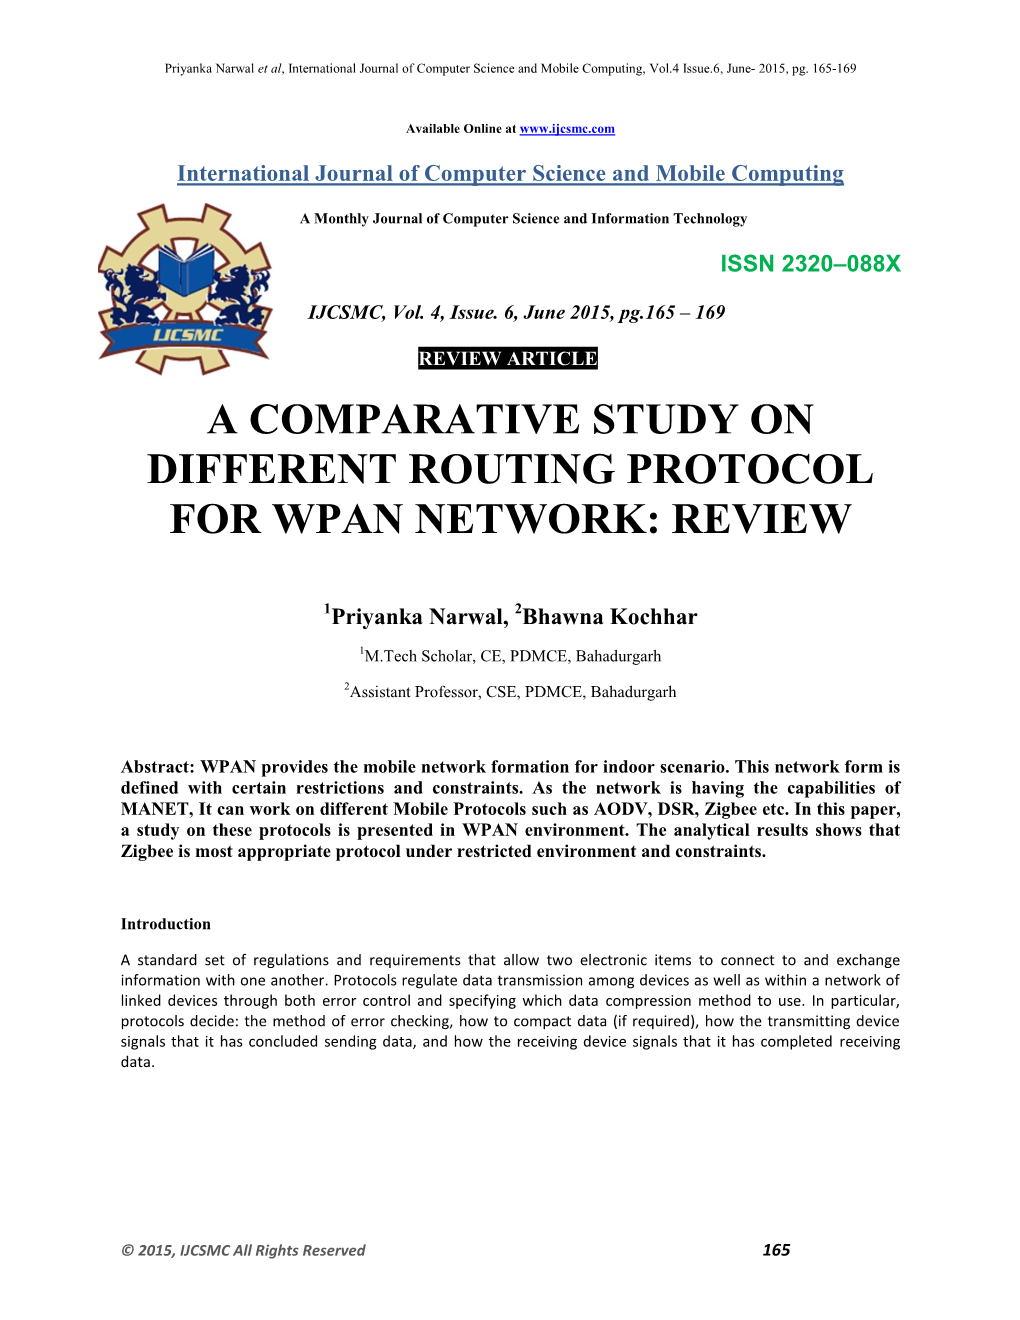 A Comparative Study on Different Routing Protocol for Wpan Network: Review